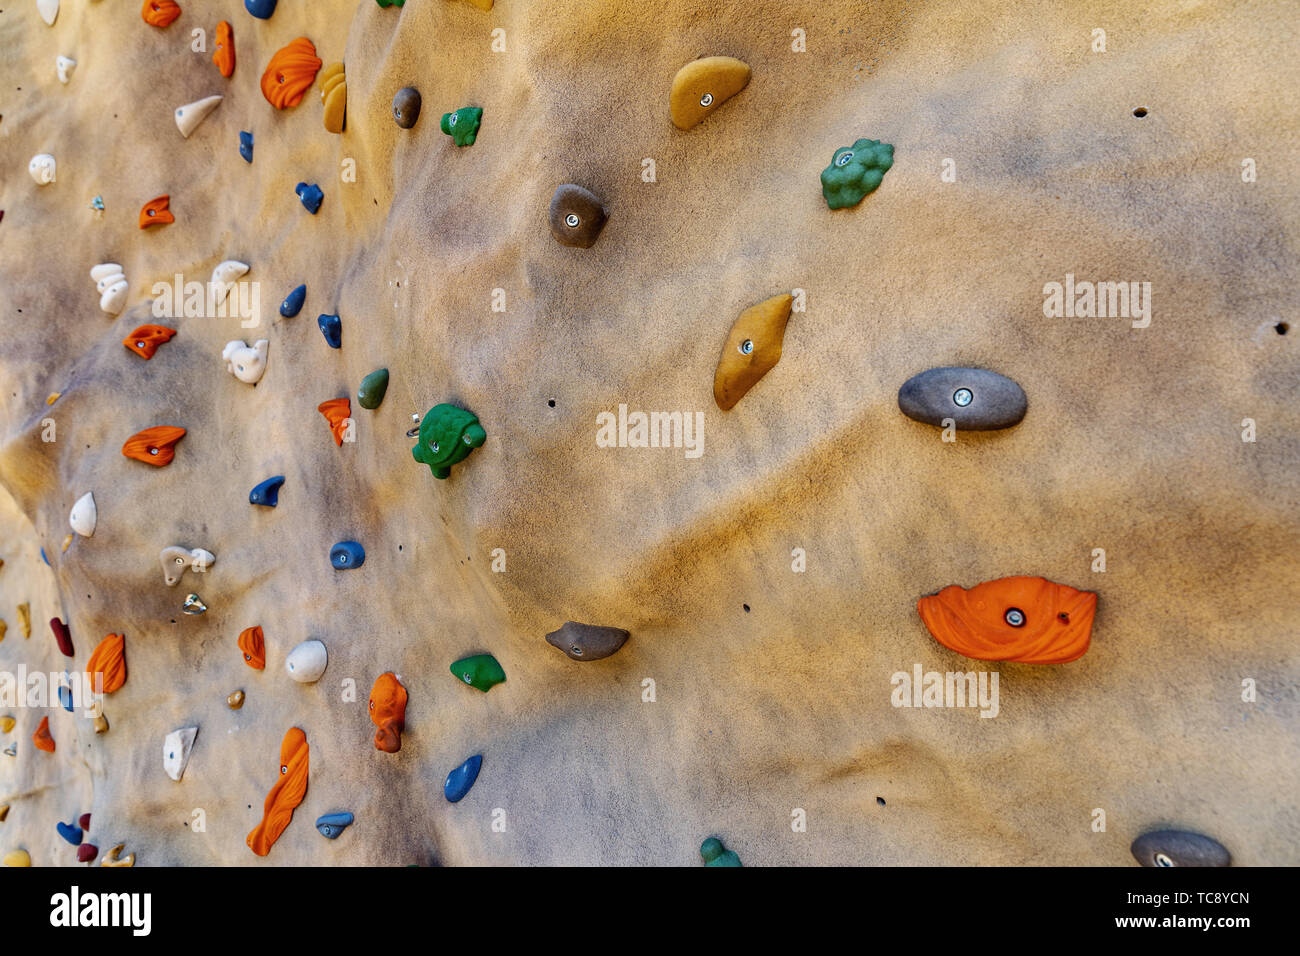 artificial climing bouldering wall Stock Photo